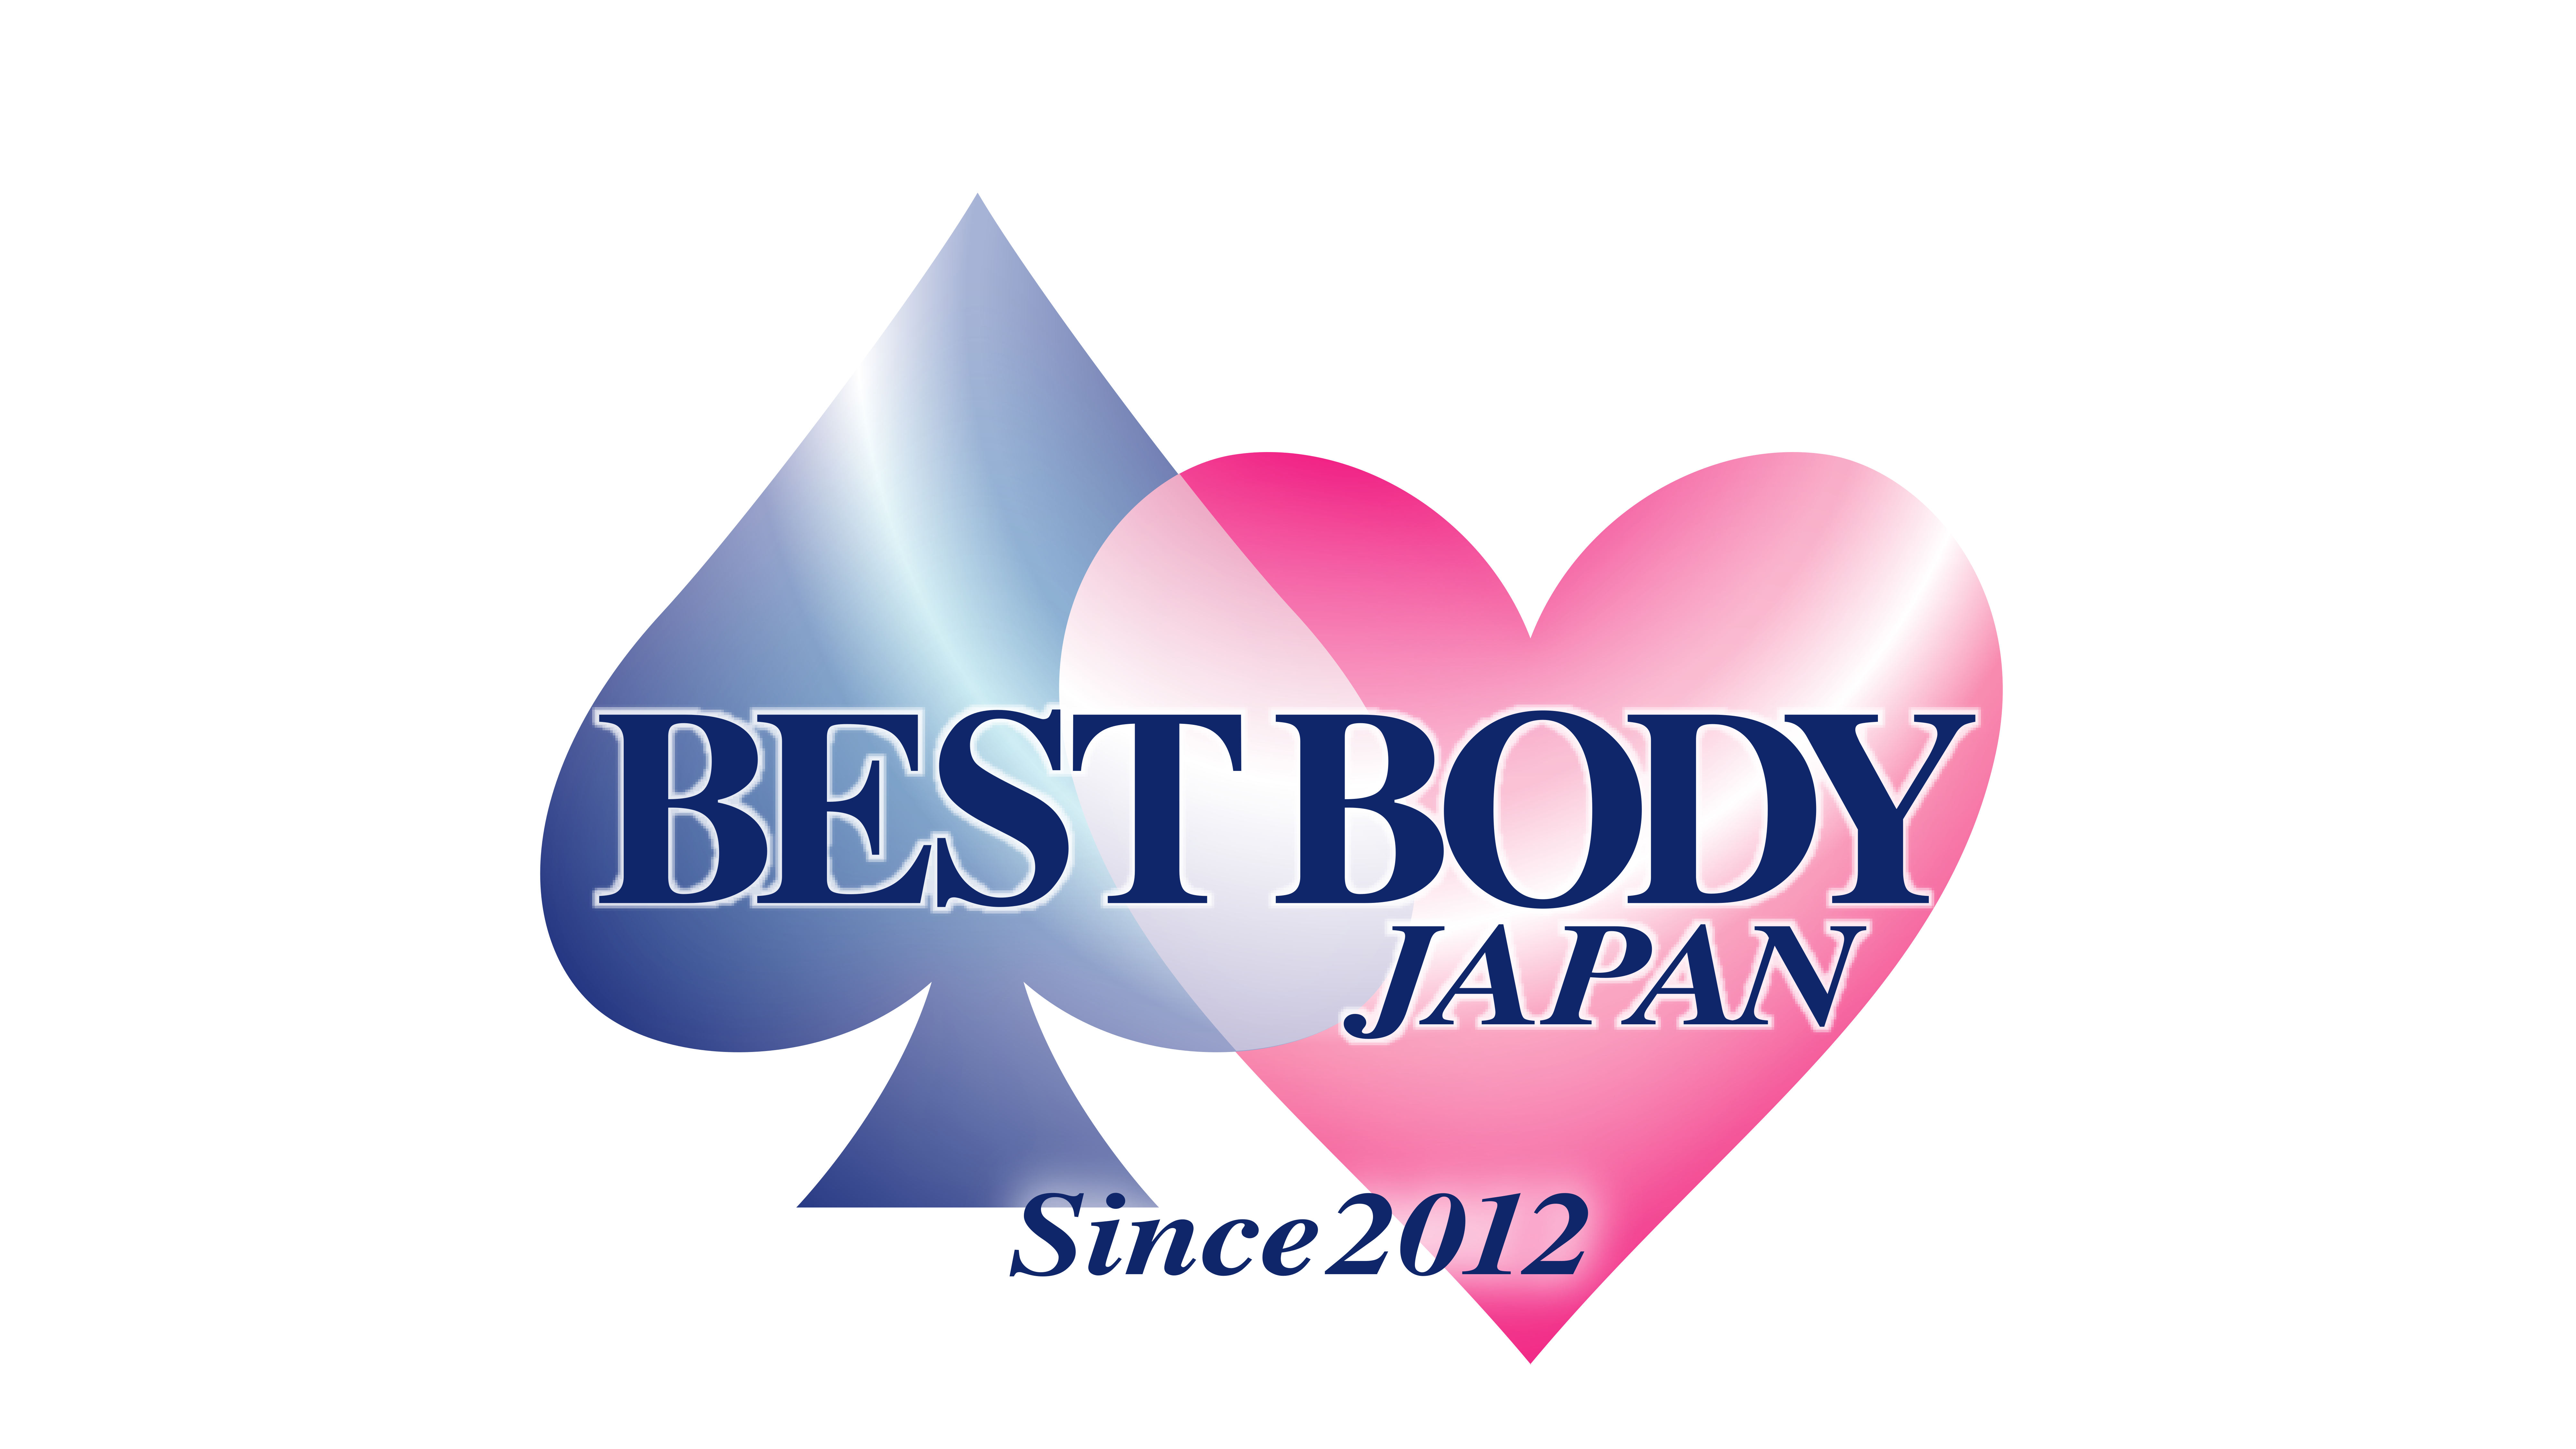 BEST BODY JAPAN – Just another WordPress site